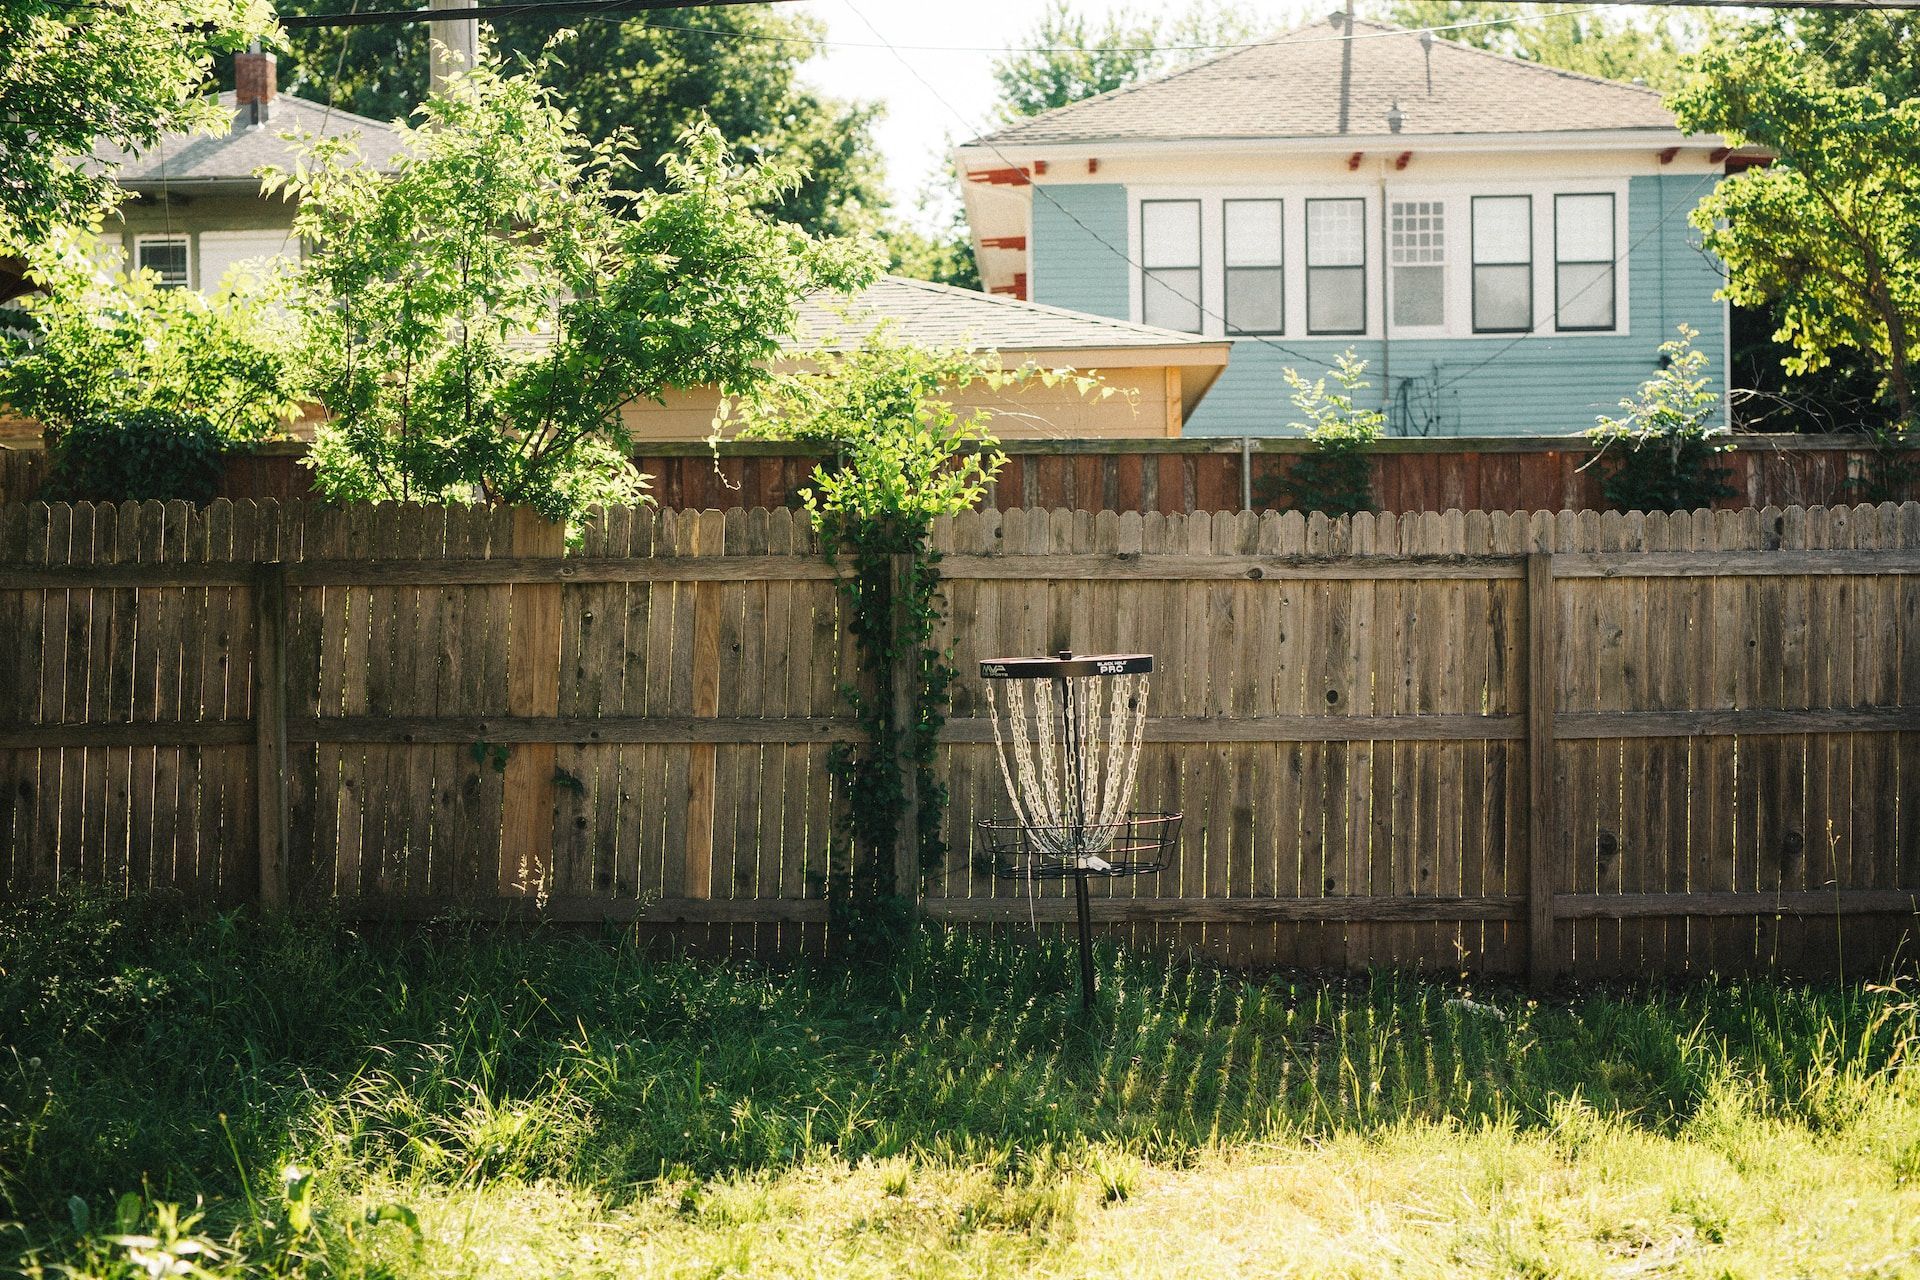 A wooden fence stretching across a backyard